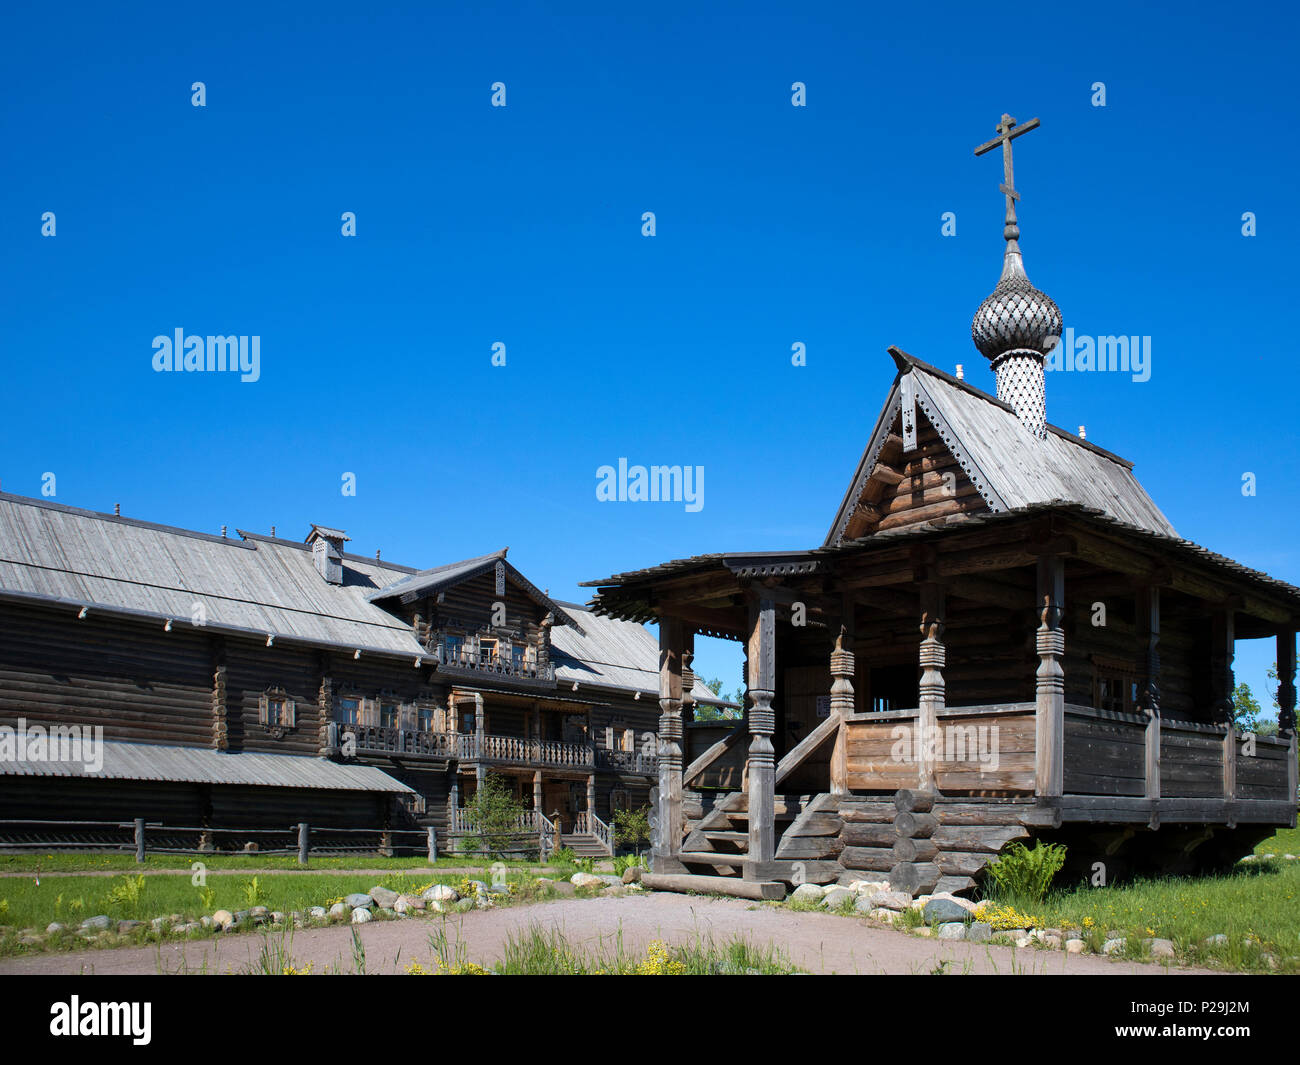 Old russian wooden architecture, small wooden church against blue sky Stock Photo